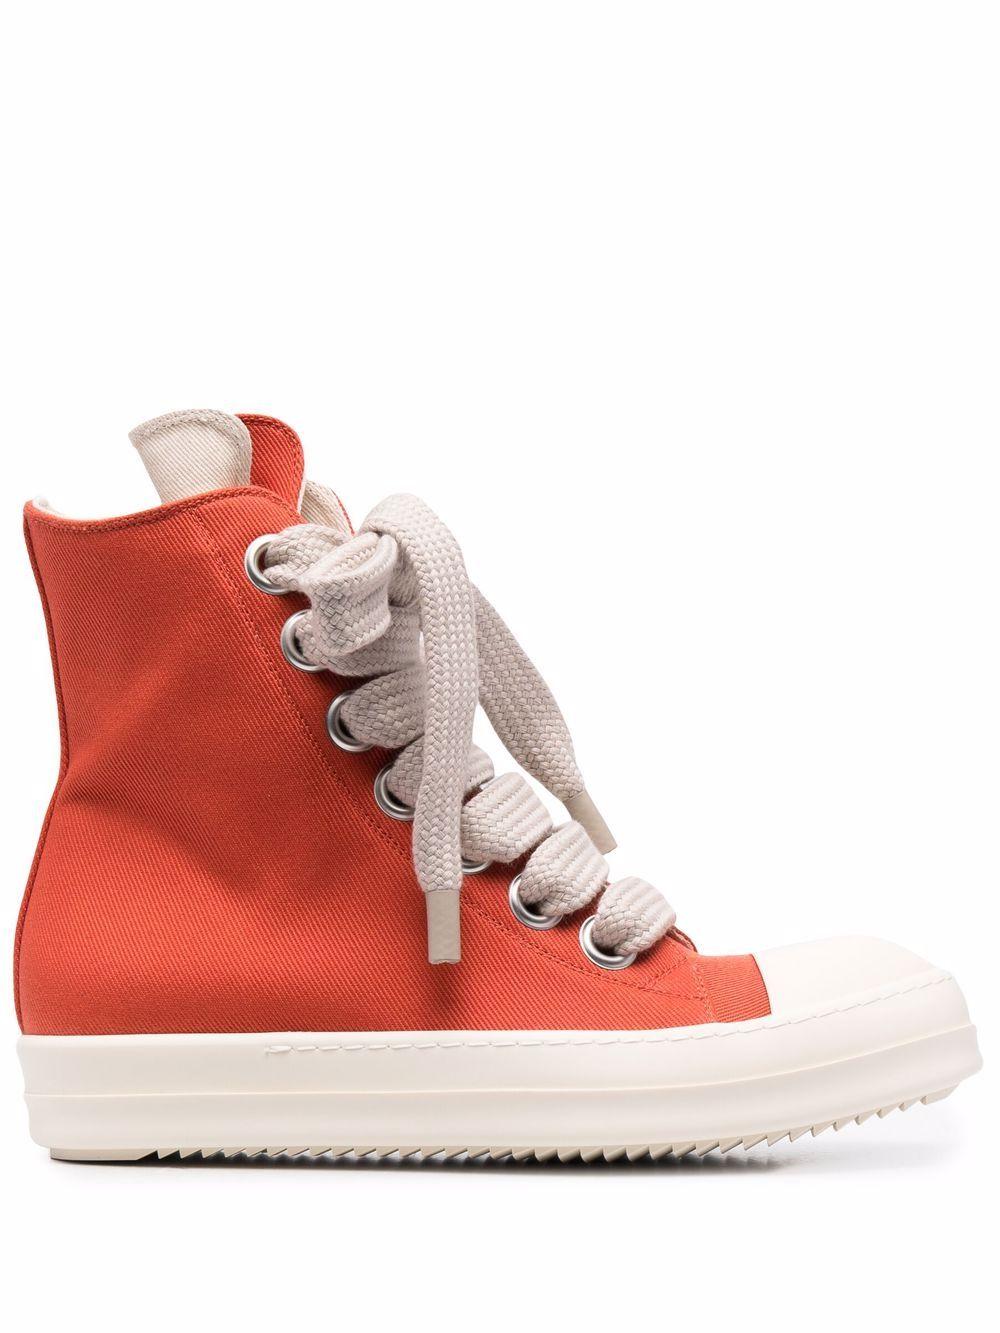 Rick Owens DRKSHDW Lace-up High-top Sneakers in Orange for Men | Lyst